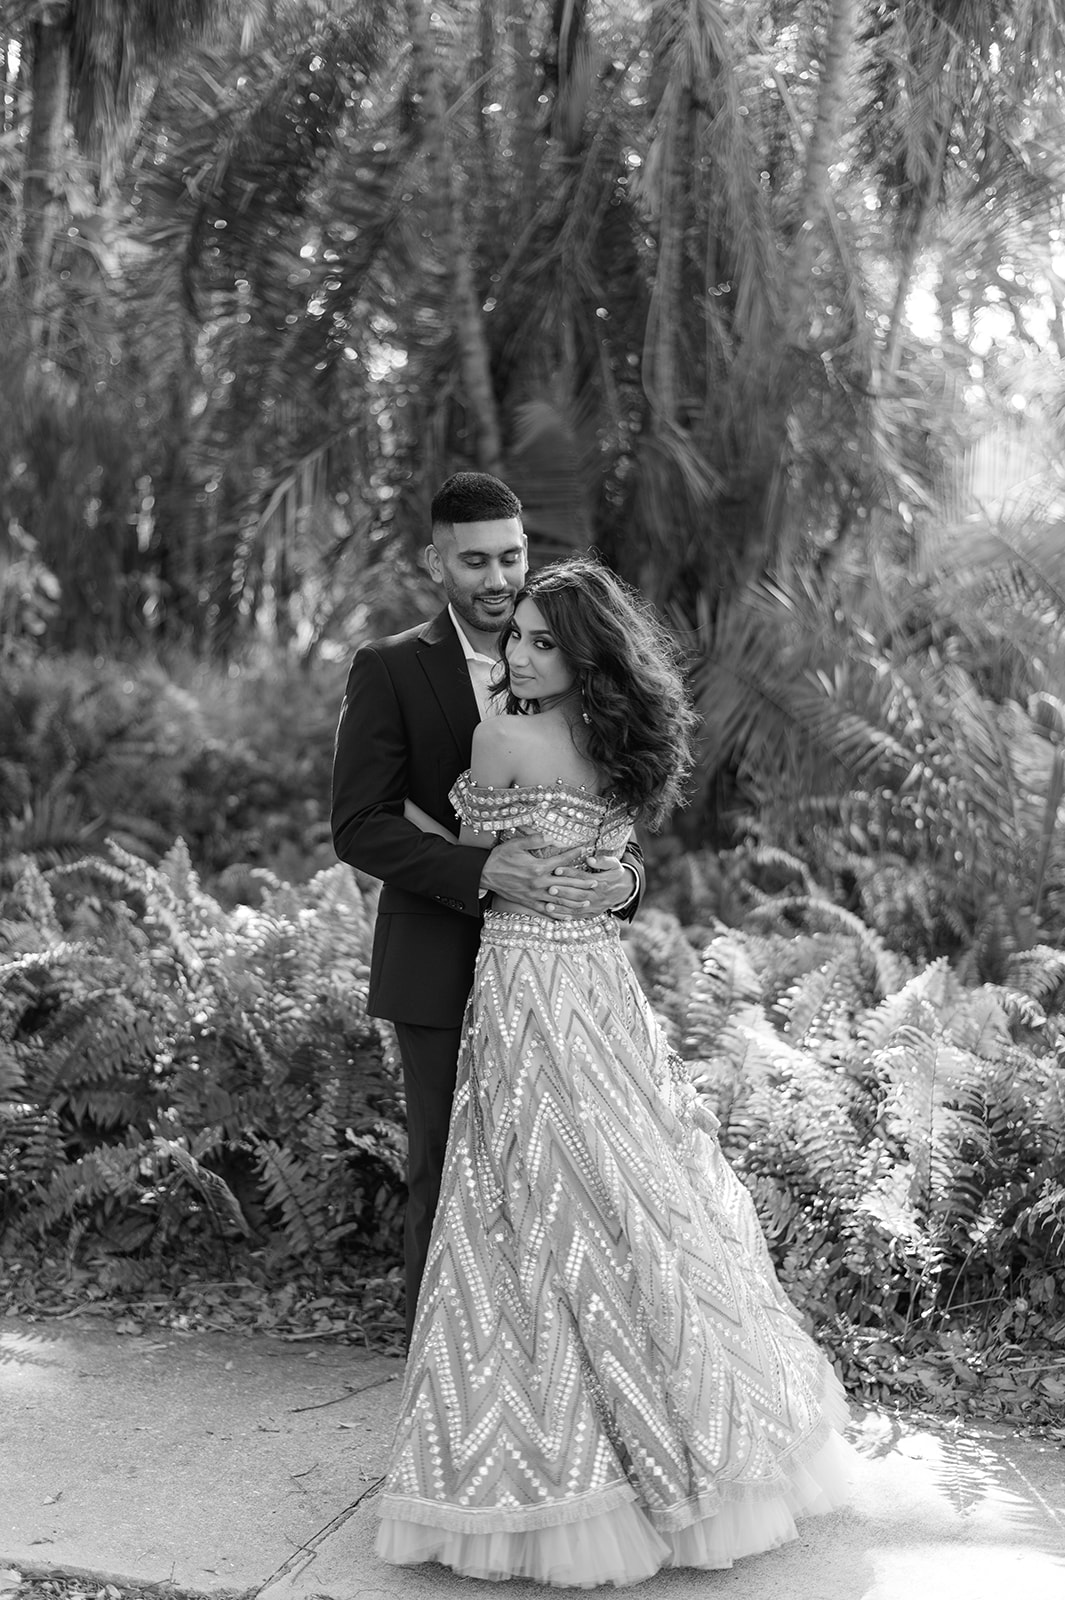 "Elegant engagement session at the John and Mable Ringling Museum features stunning Indian couple"
